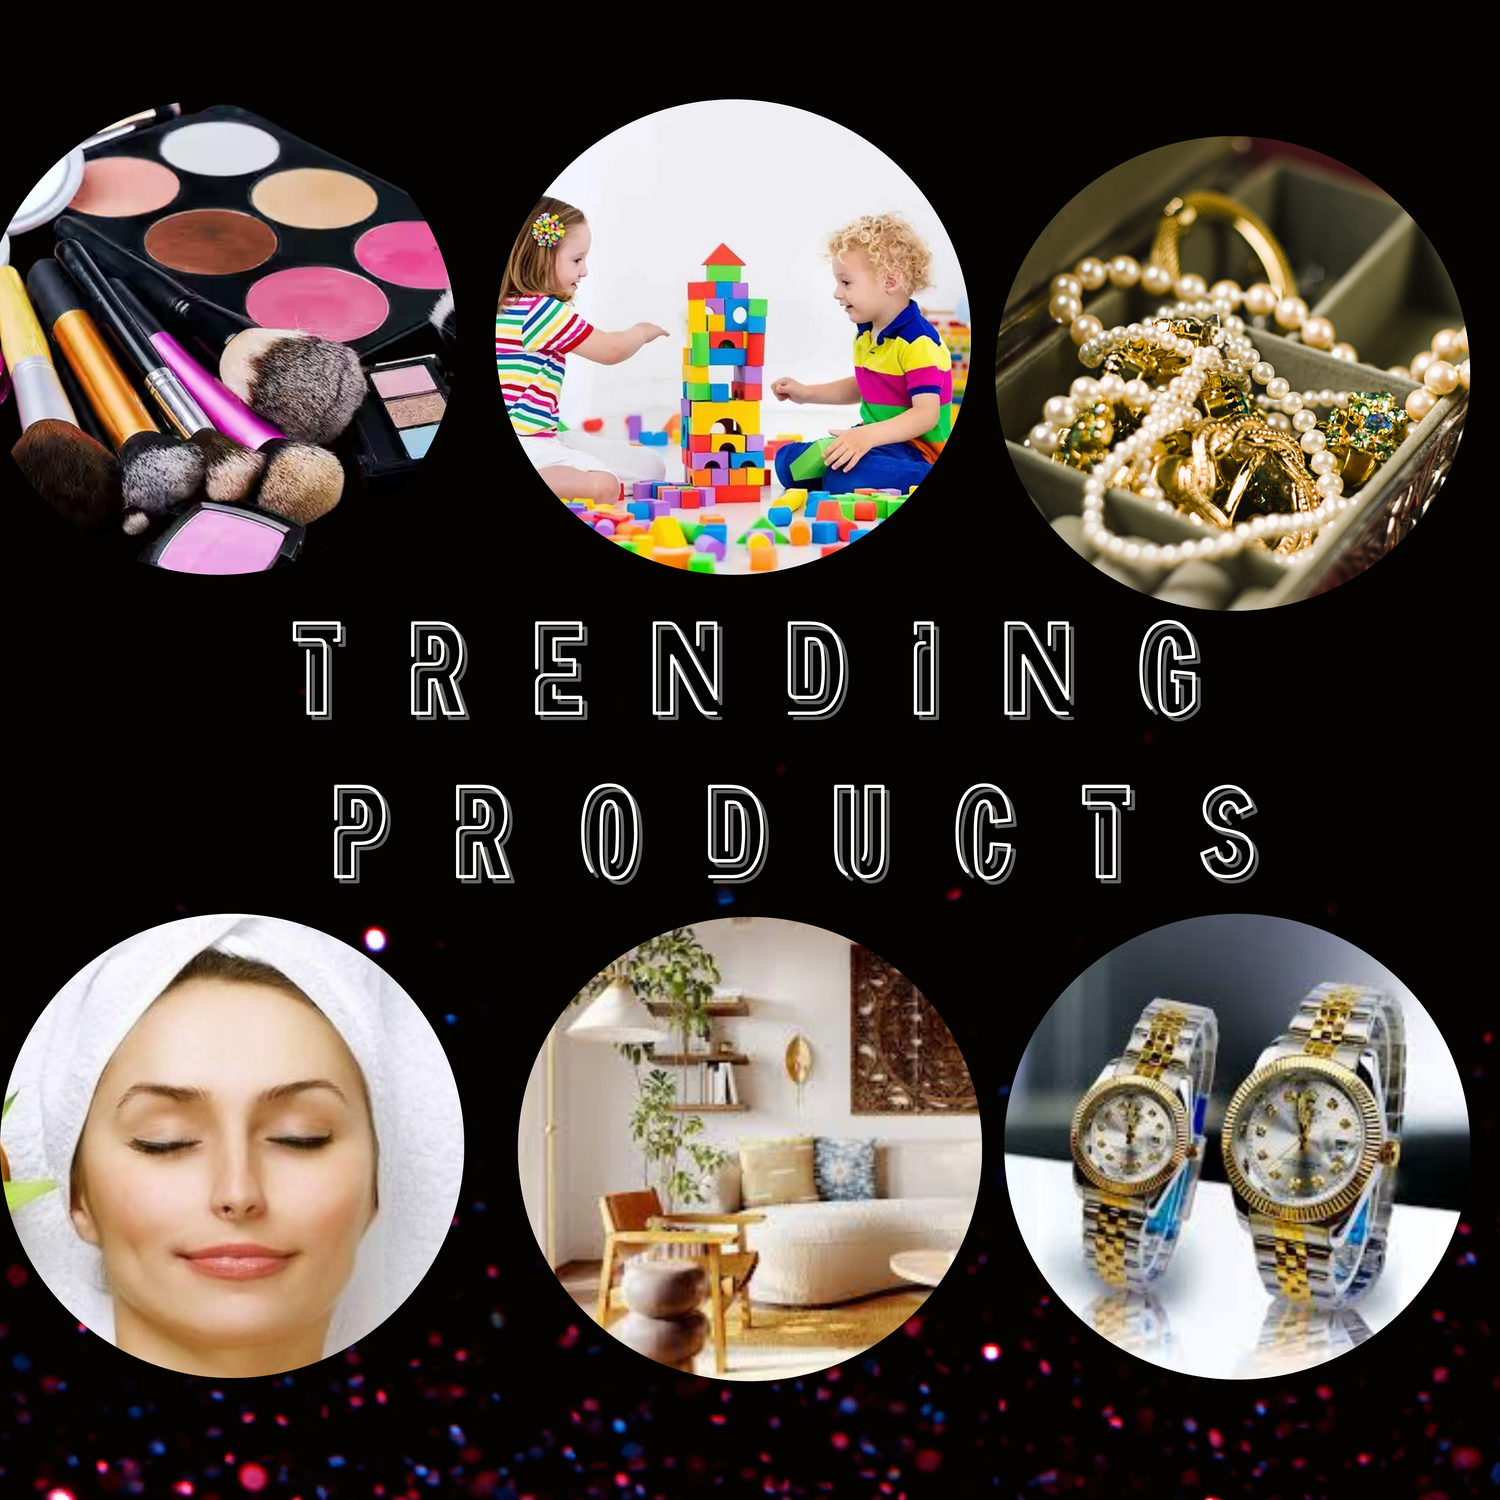 Trending Products